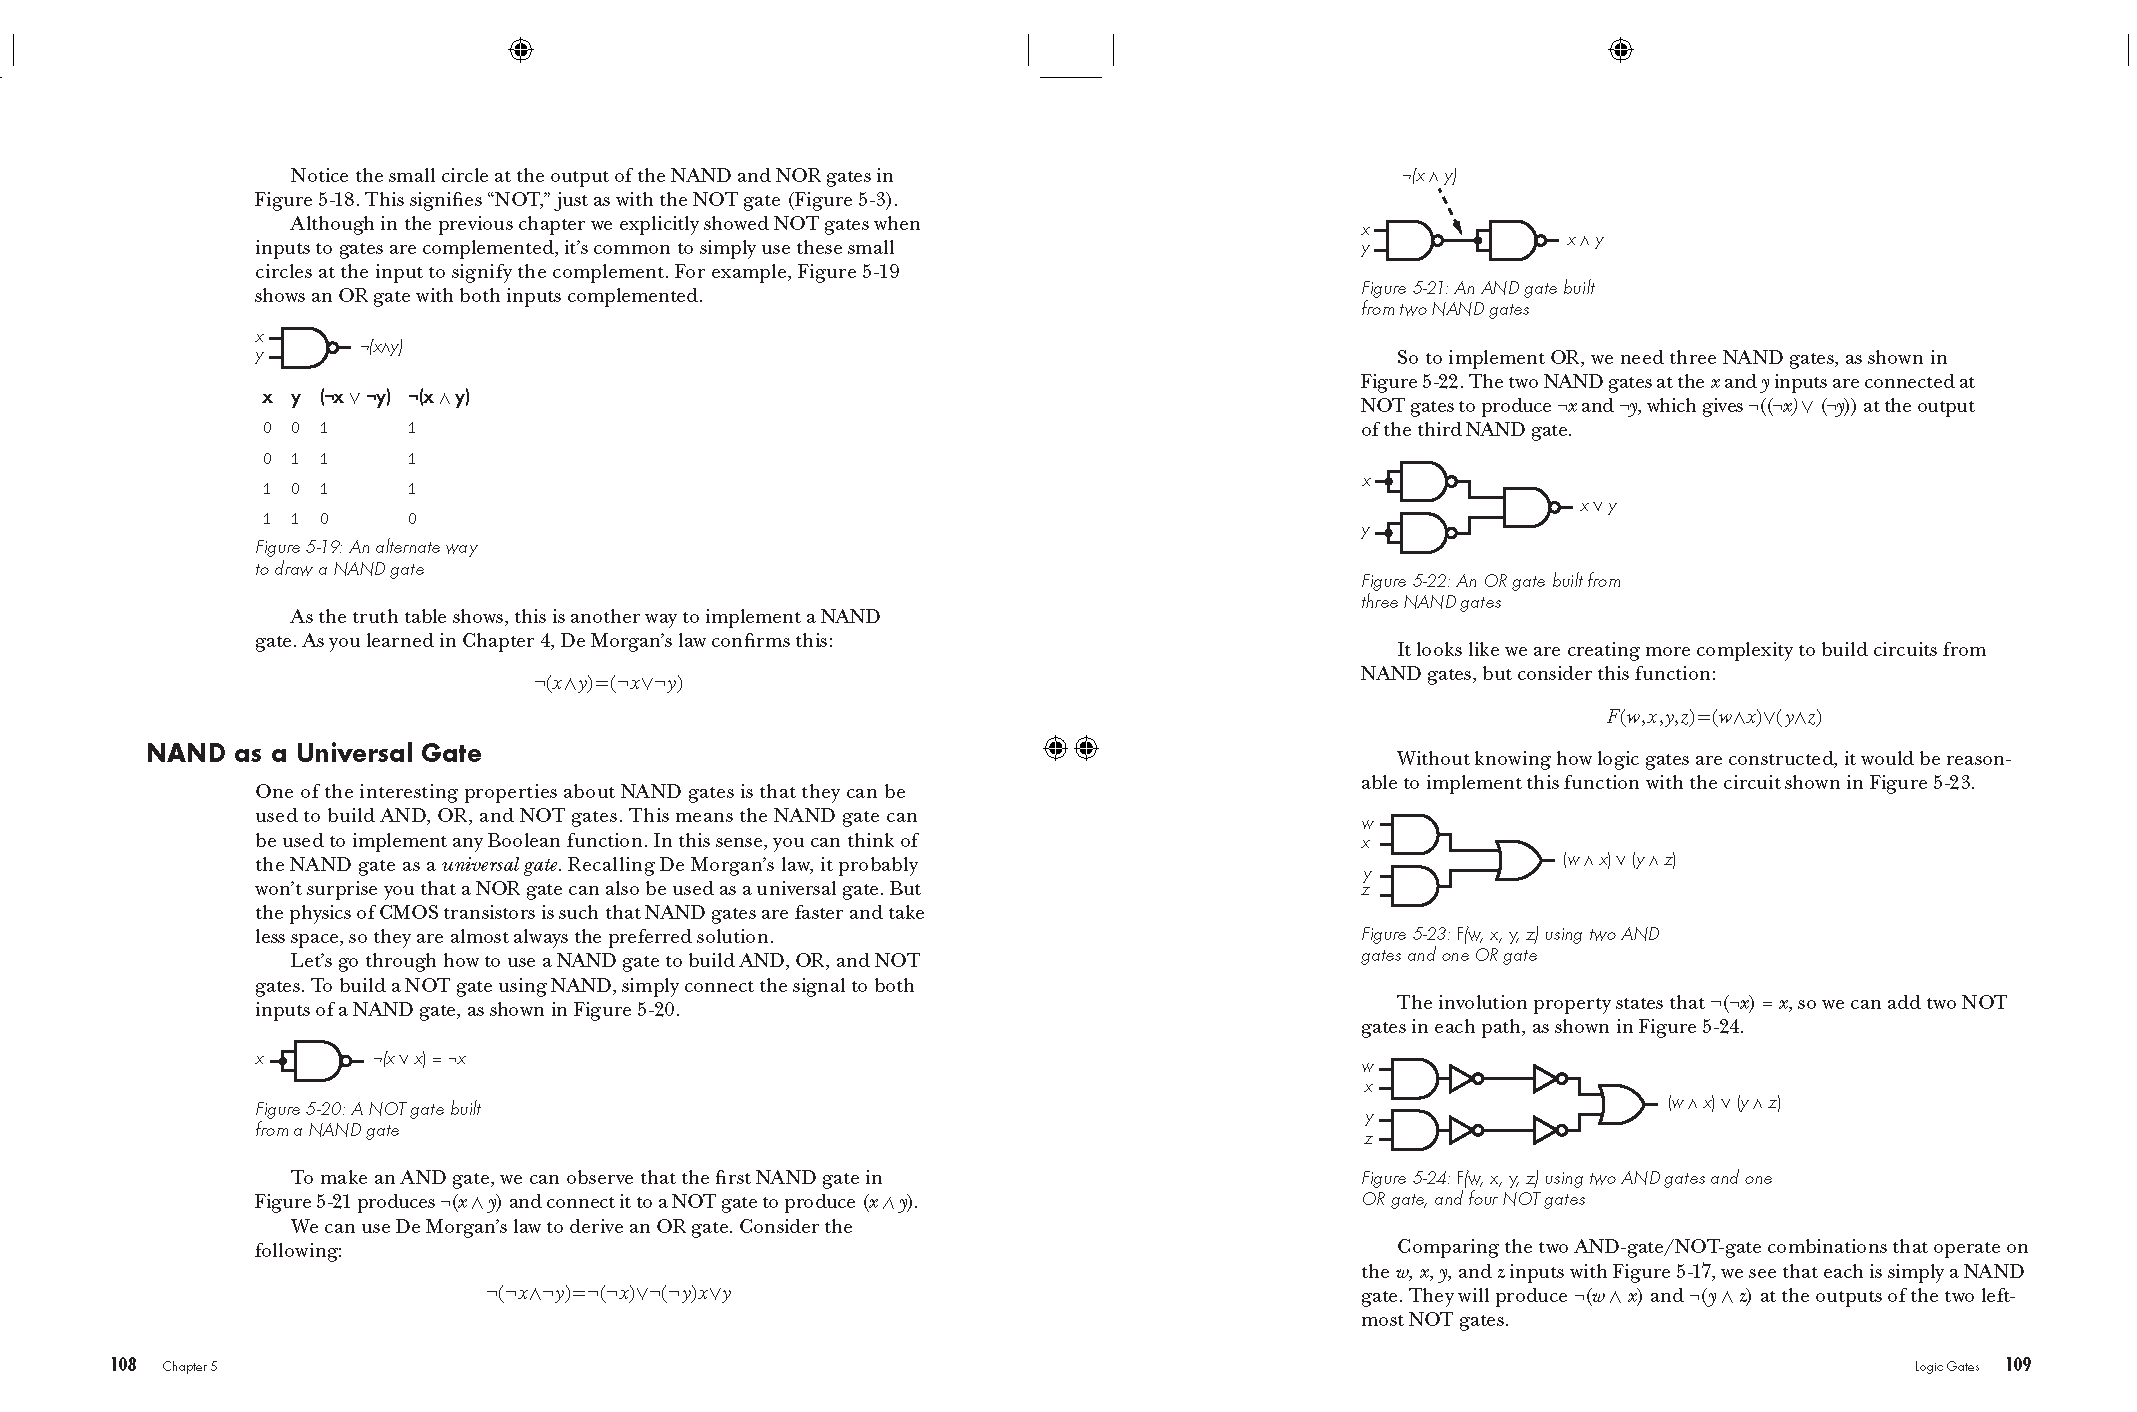 Introduction to Computer Organization pages 108 and 109